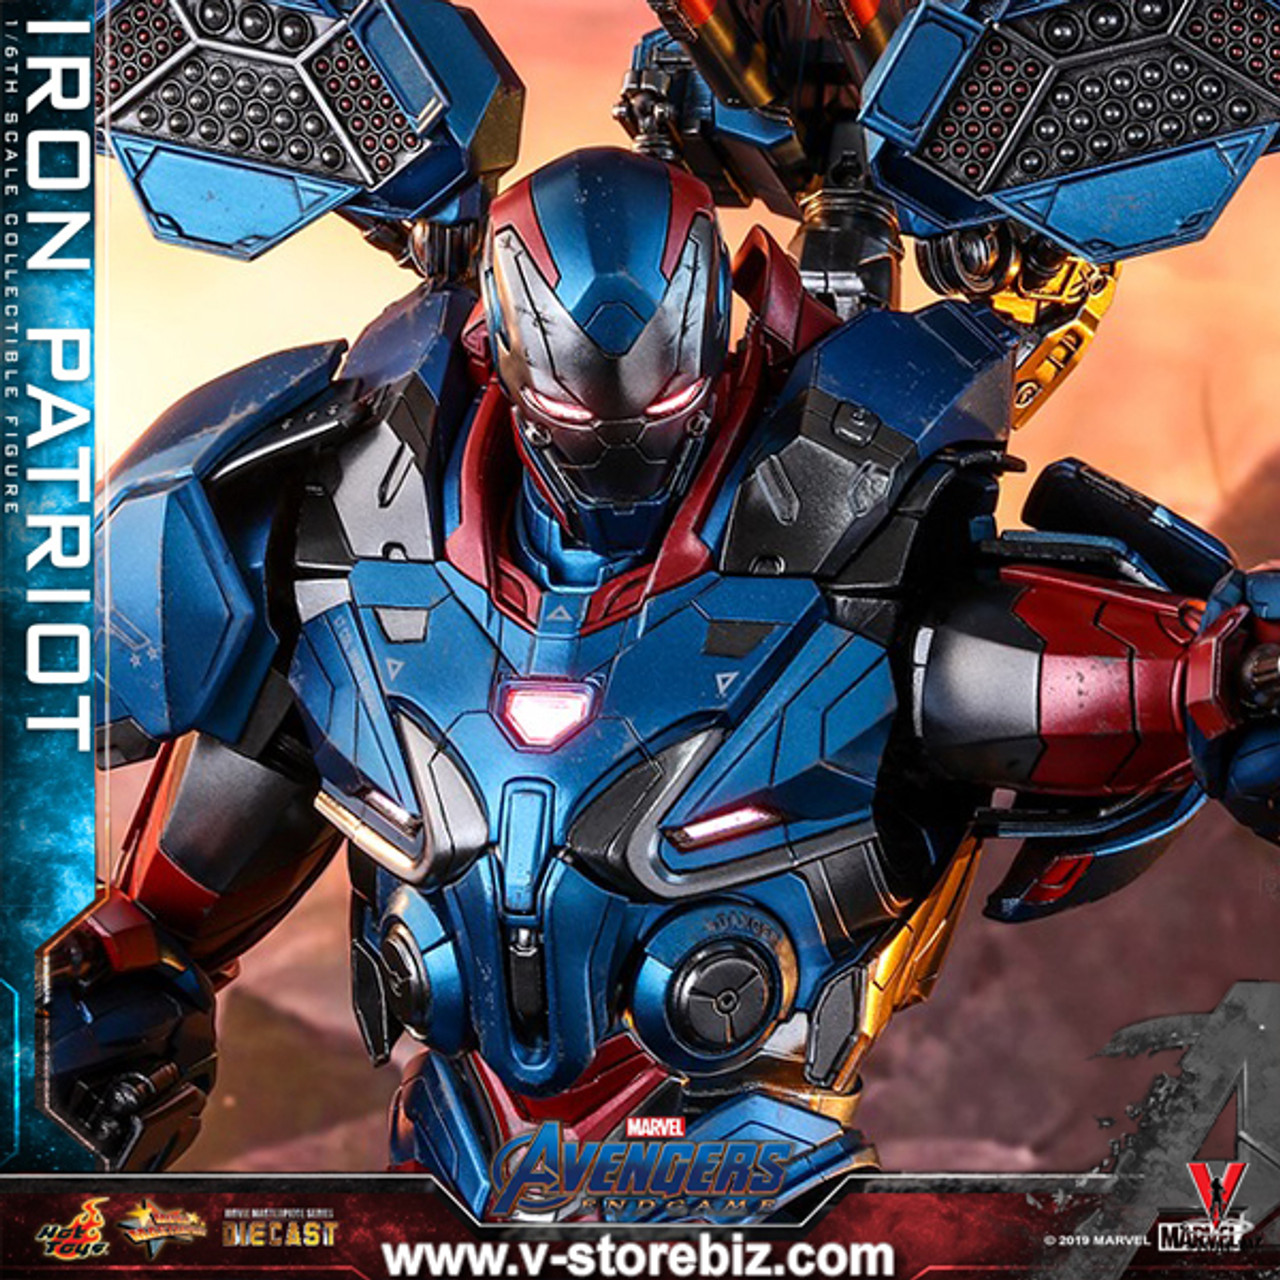 Movie Masterpiece DIECAST Avengers: End Game, 1/6 Scale Figure, Iron Patriot